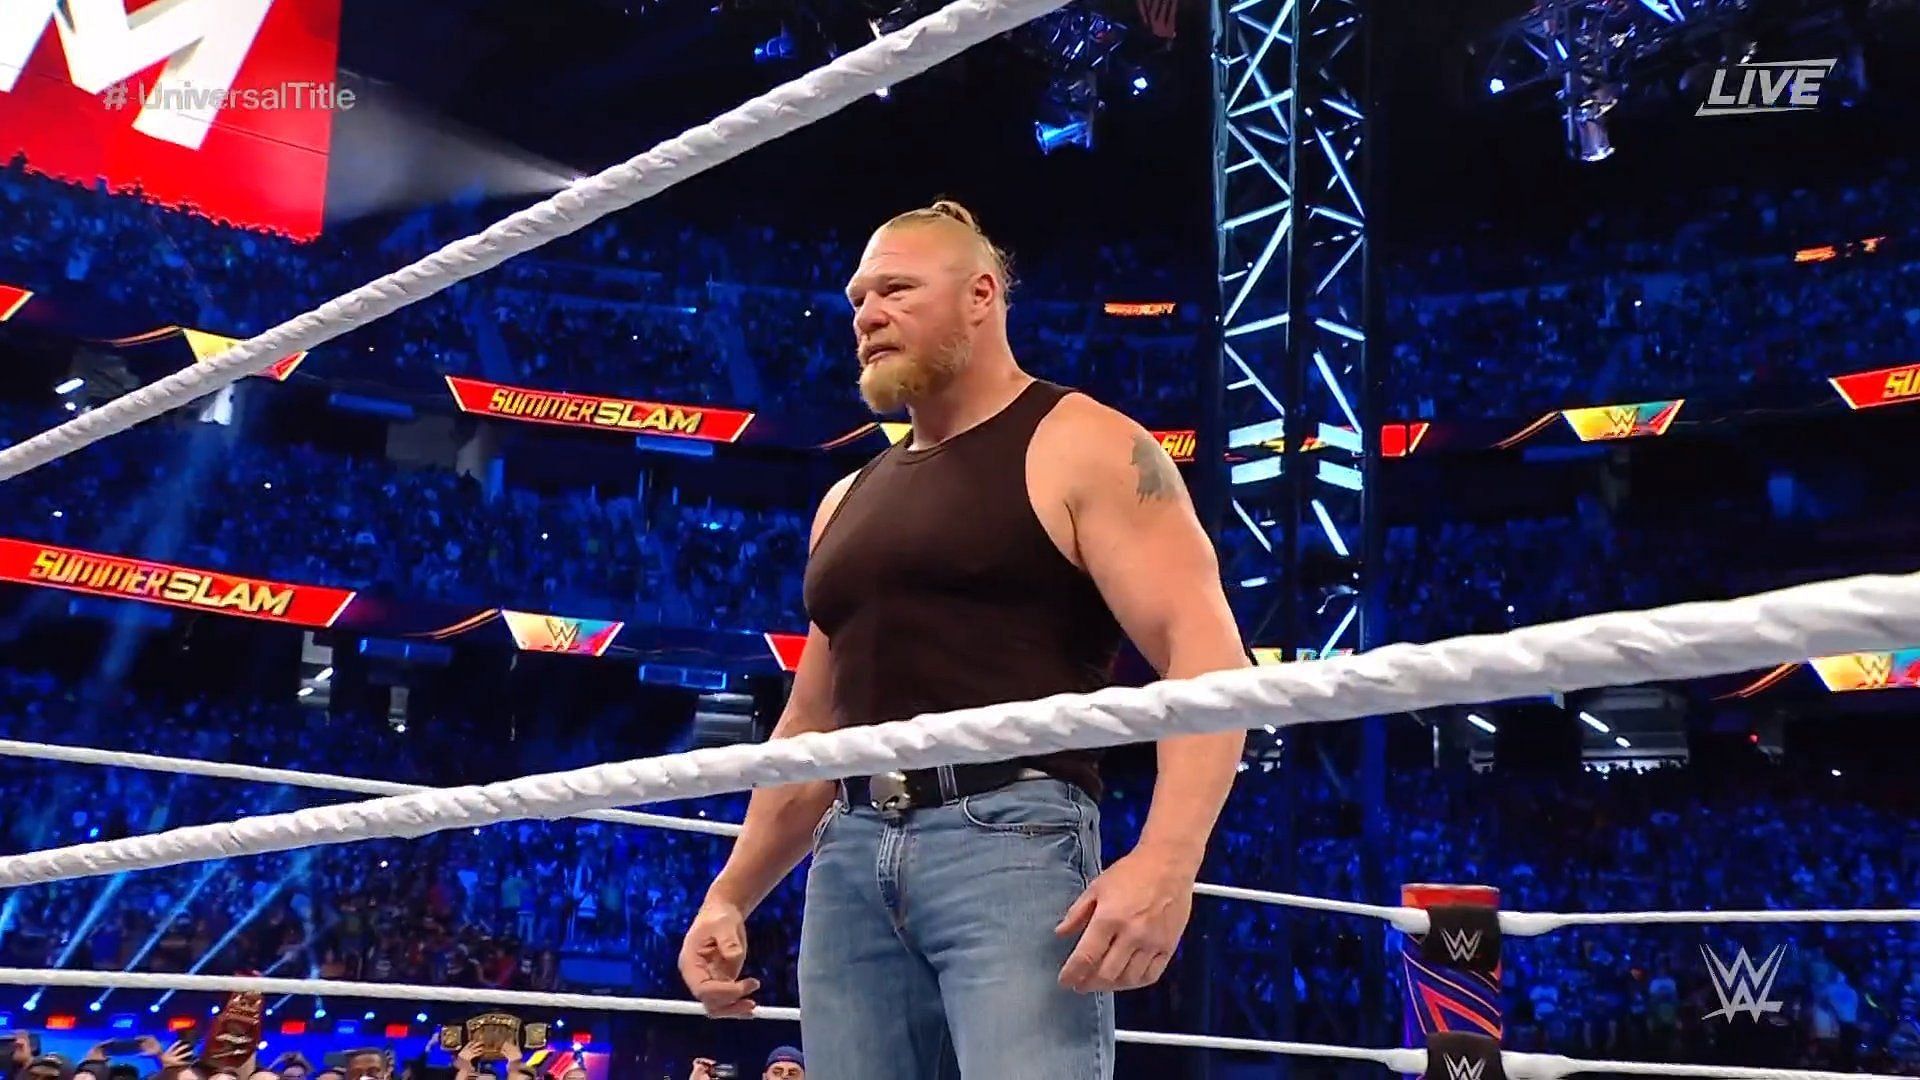 Brock Lesnar returned to WWE at SummerSlam 2021 to confront Roman Reigns.